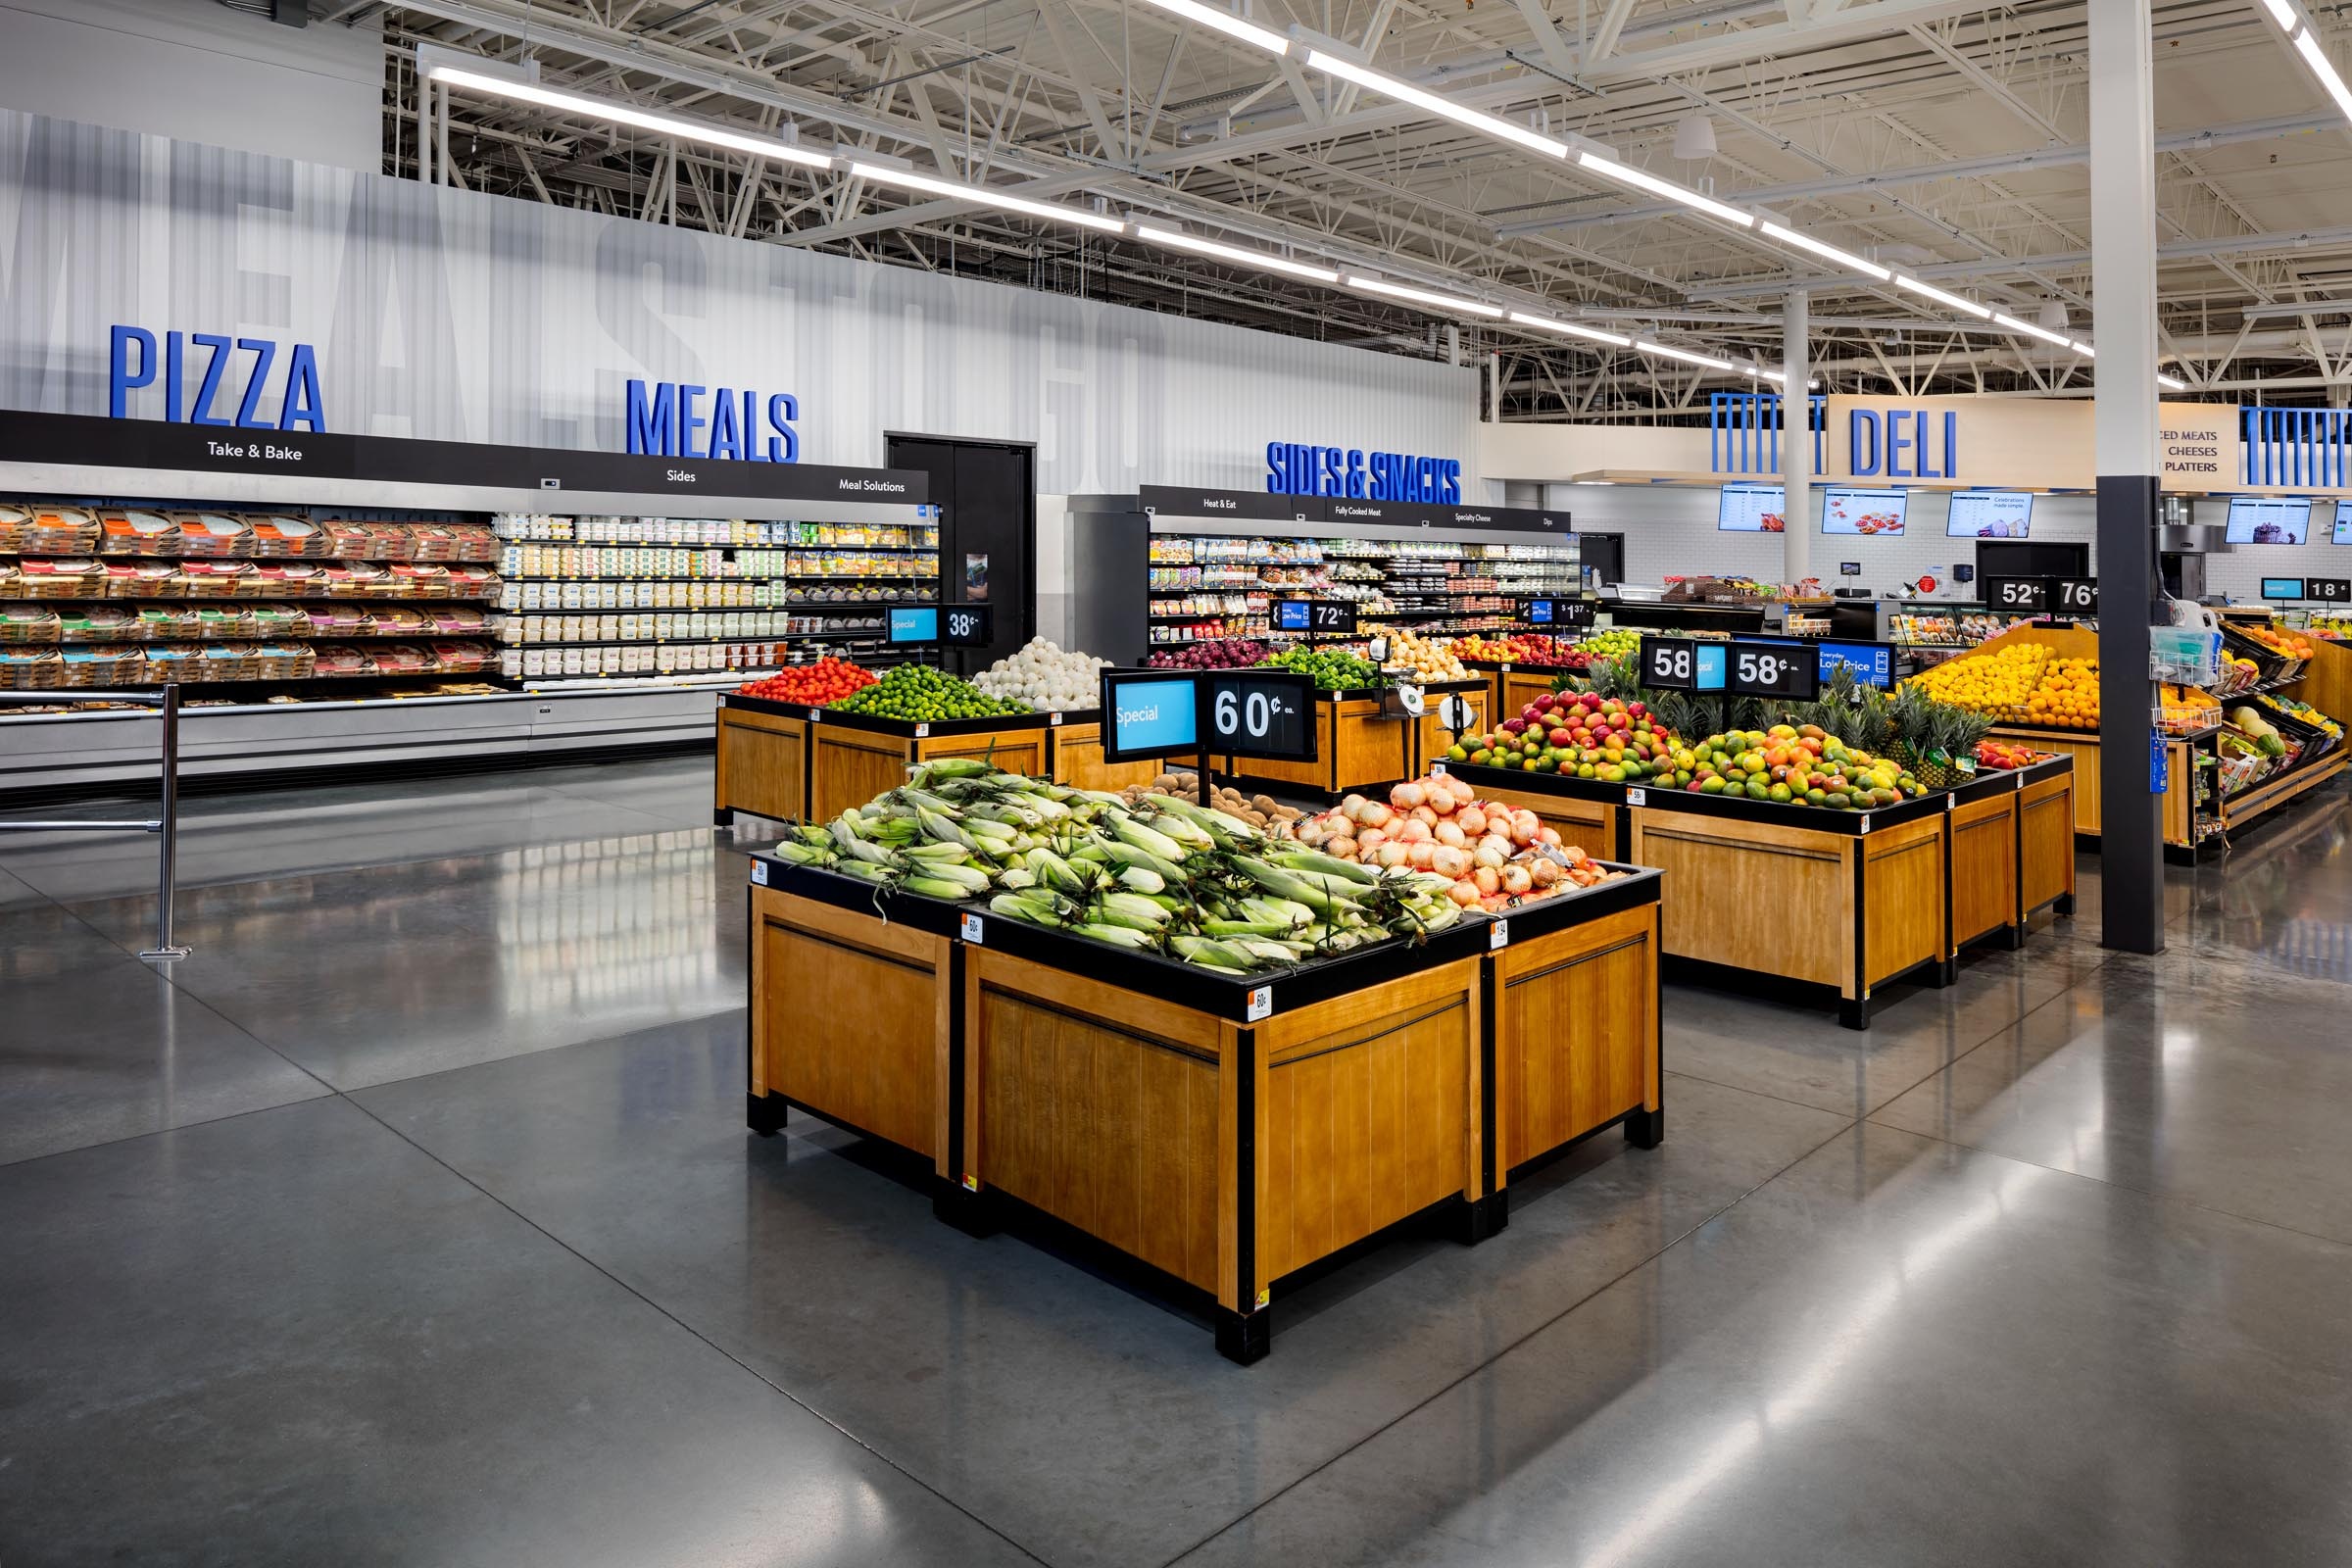 Walmart: The largest United States retailer in 2019, Shopping, Stores offering grocery and consumables. 2400x1600 HD Wallpaper.